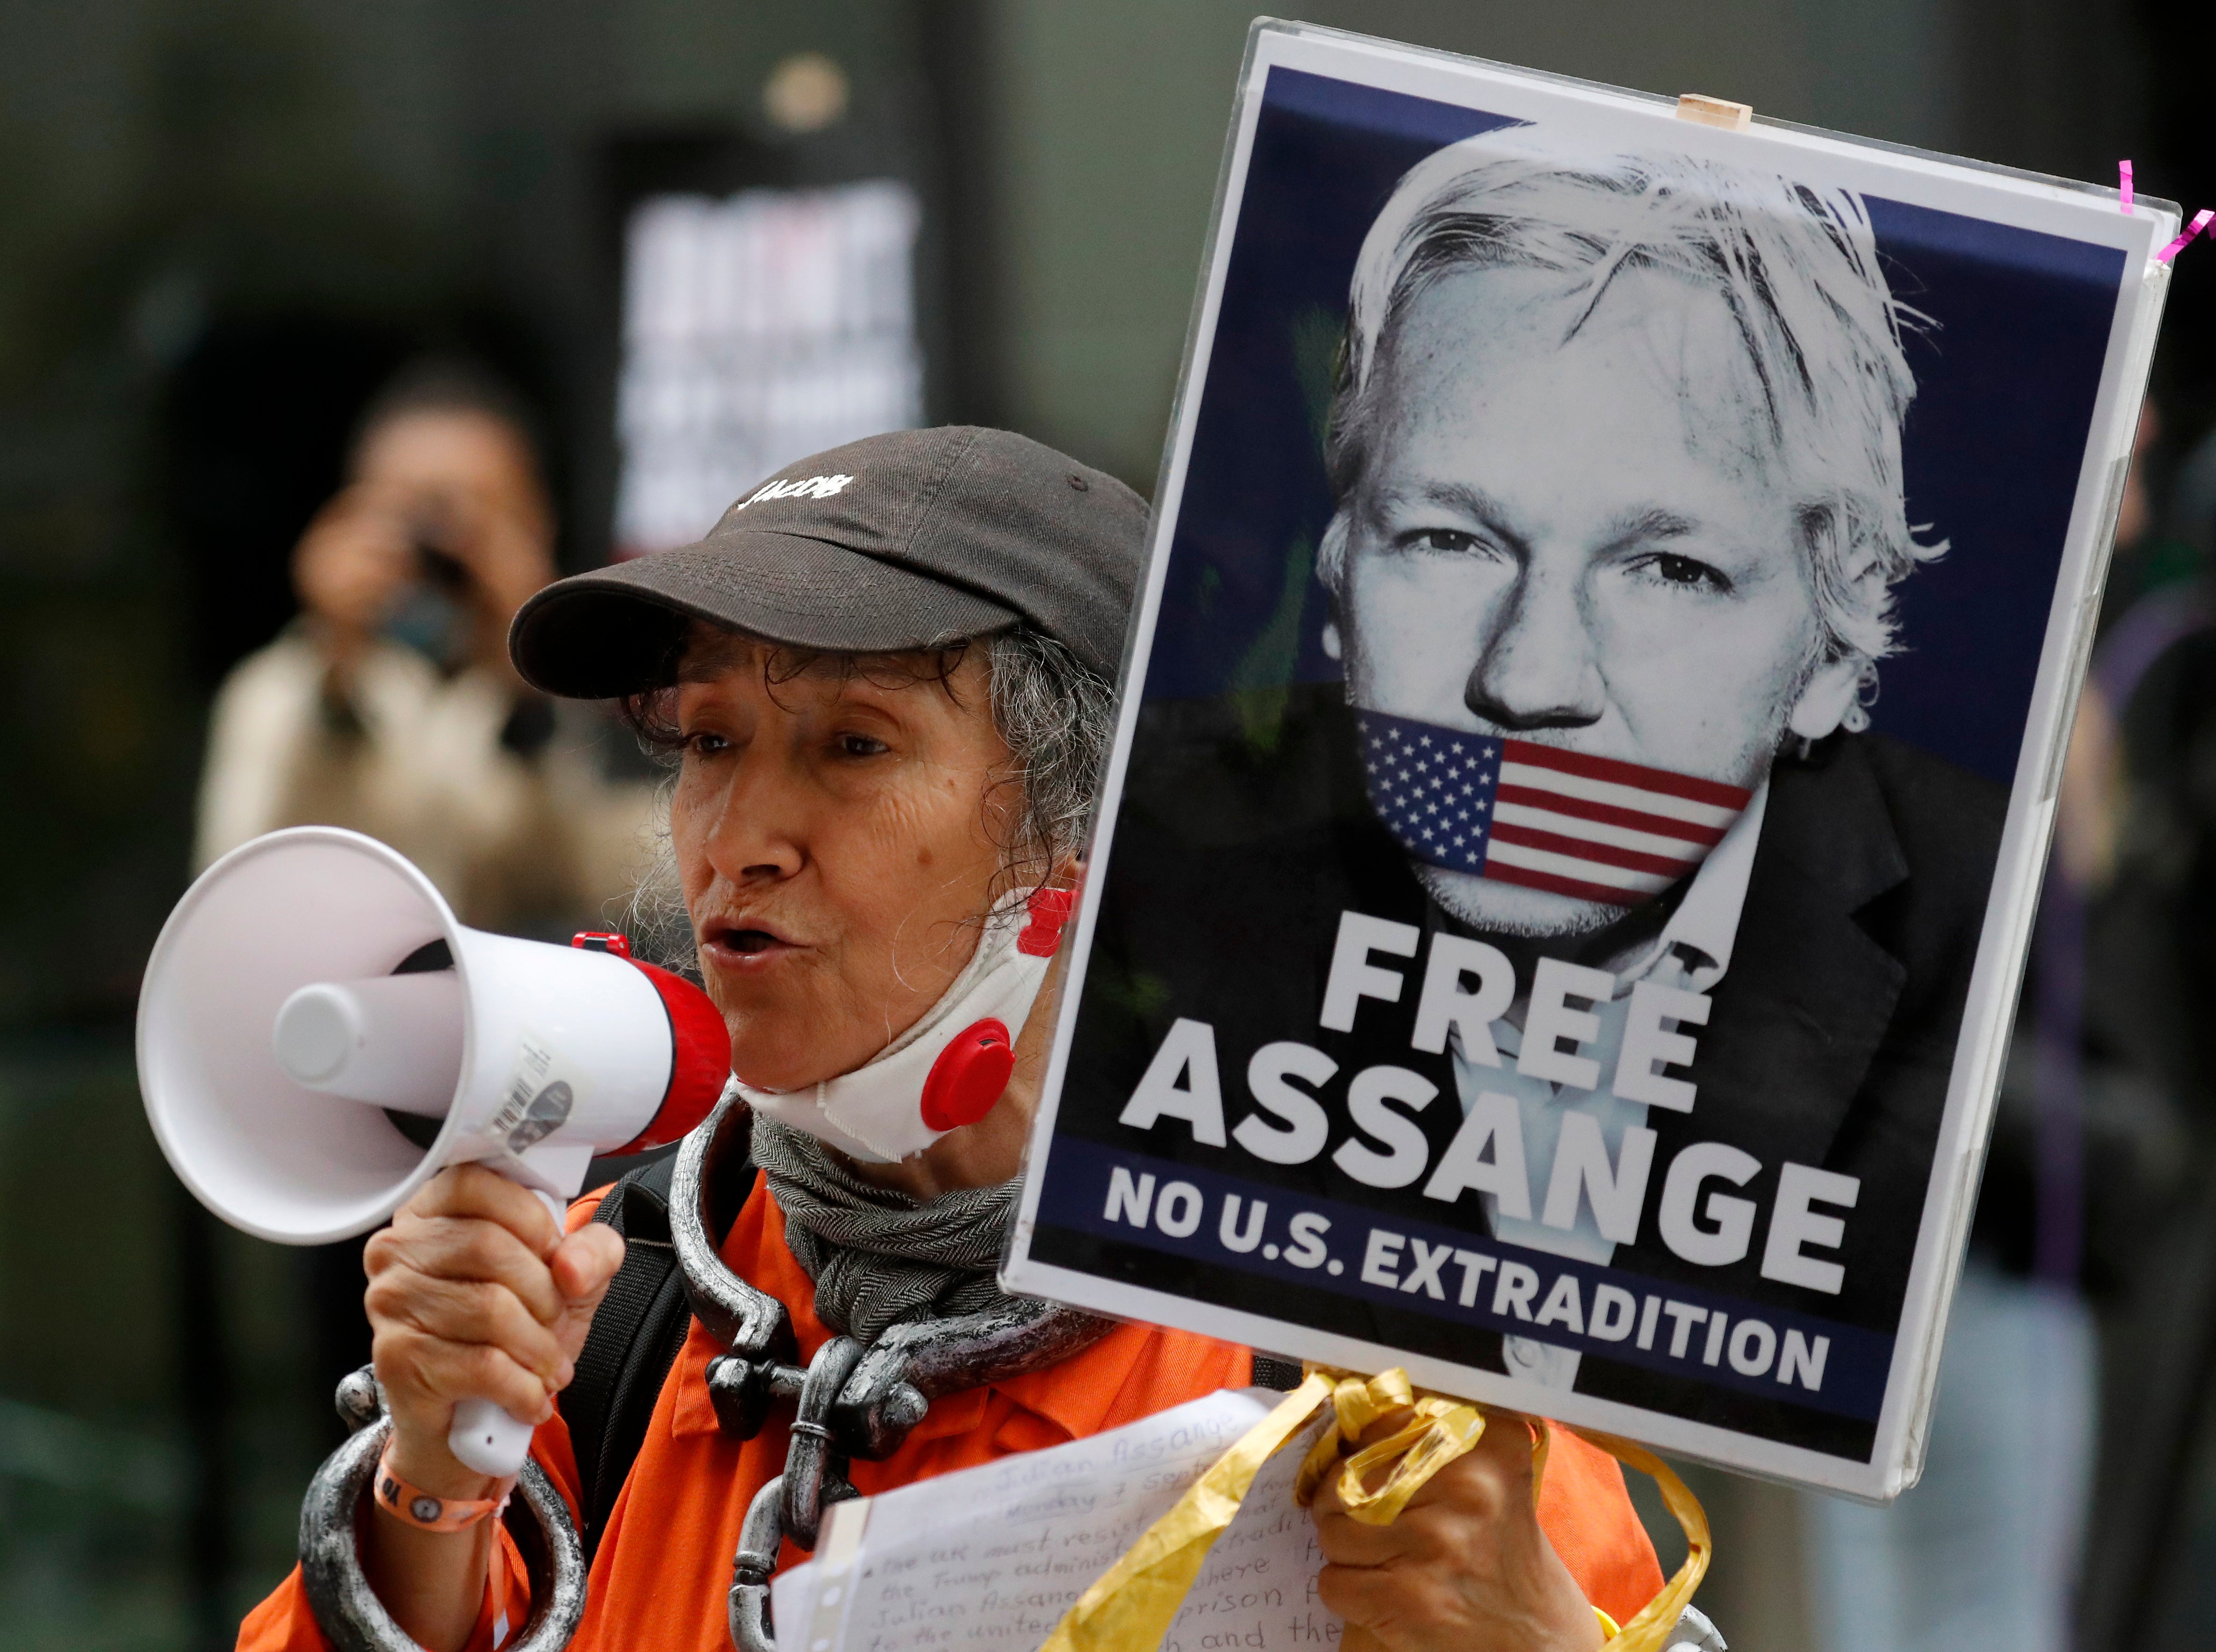 Julian Assange supporters protest outside the Old Bailey